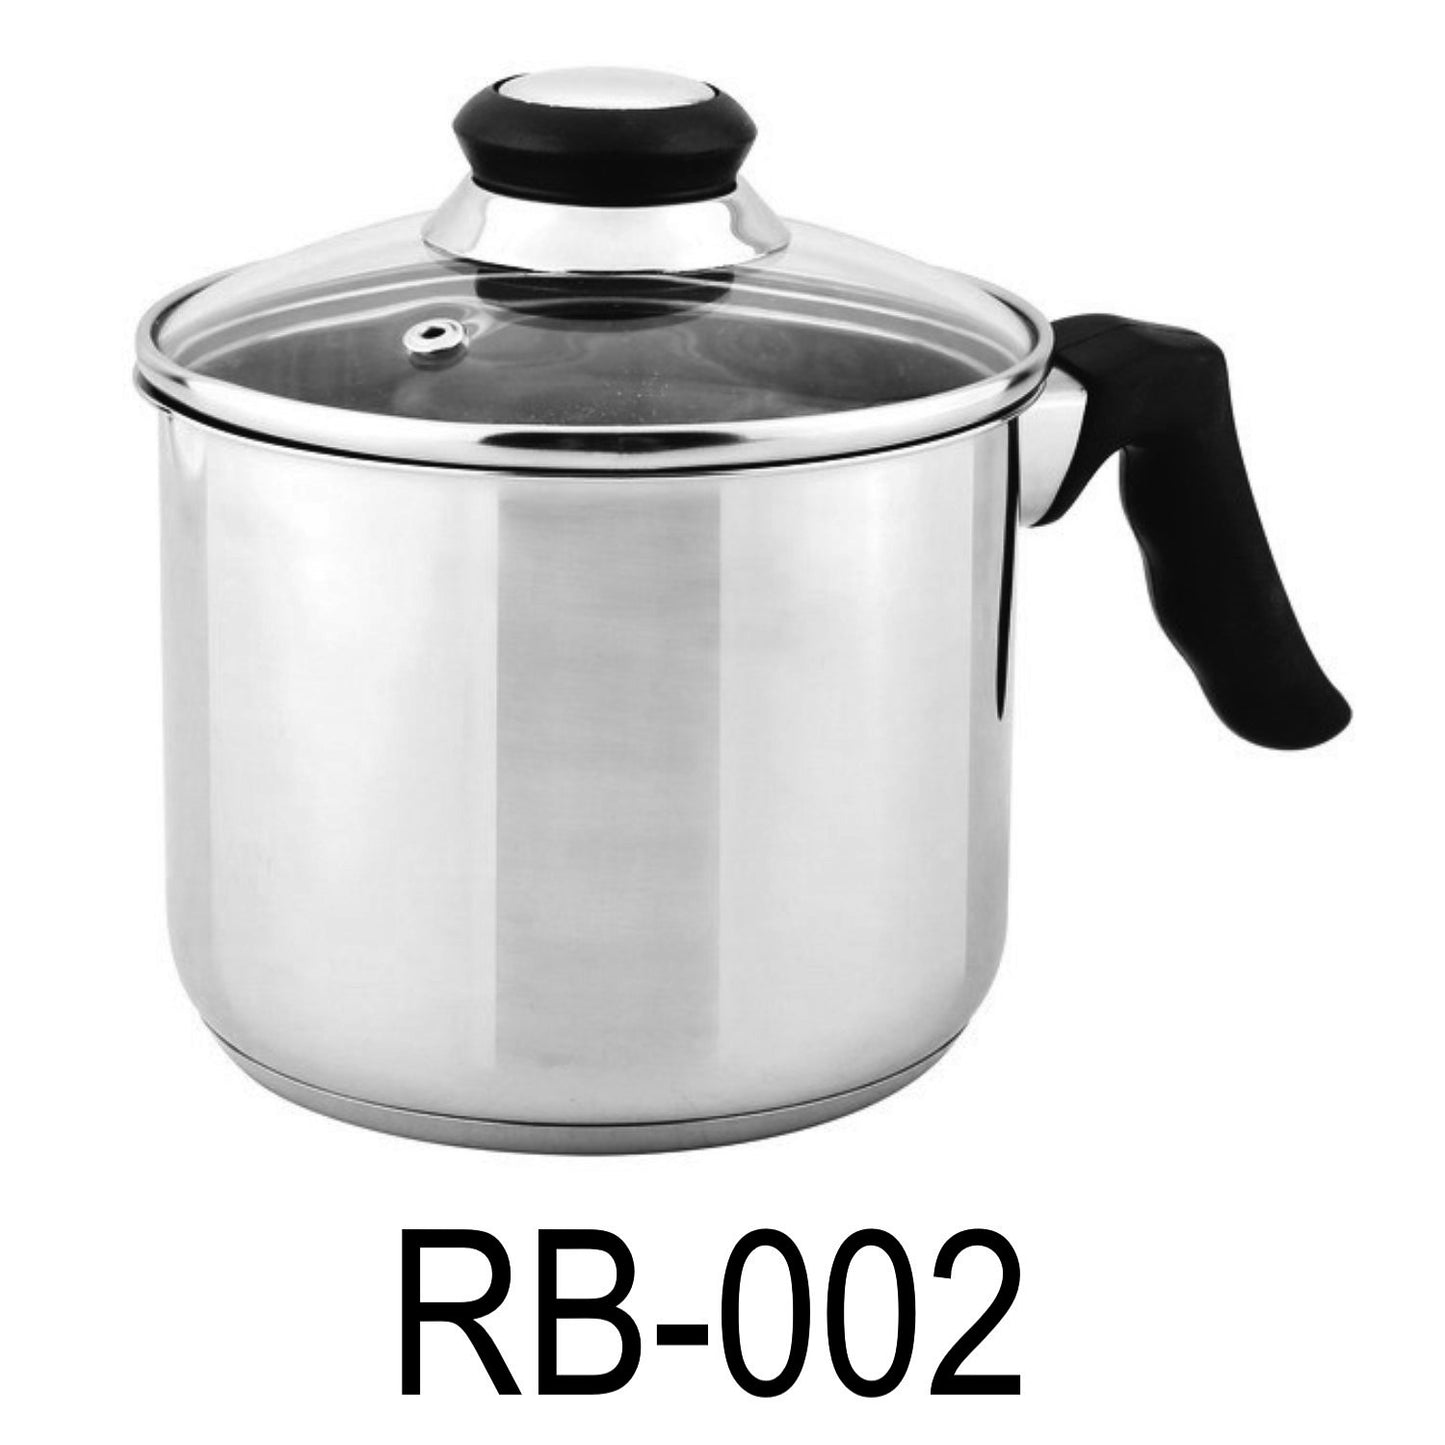 Anyone tried using this instead of stainless steel? : r/instantpot